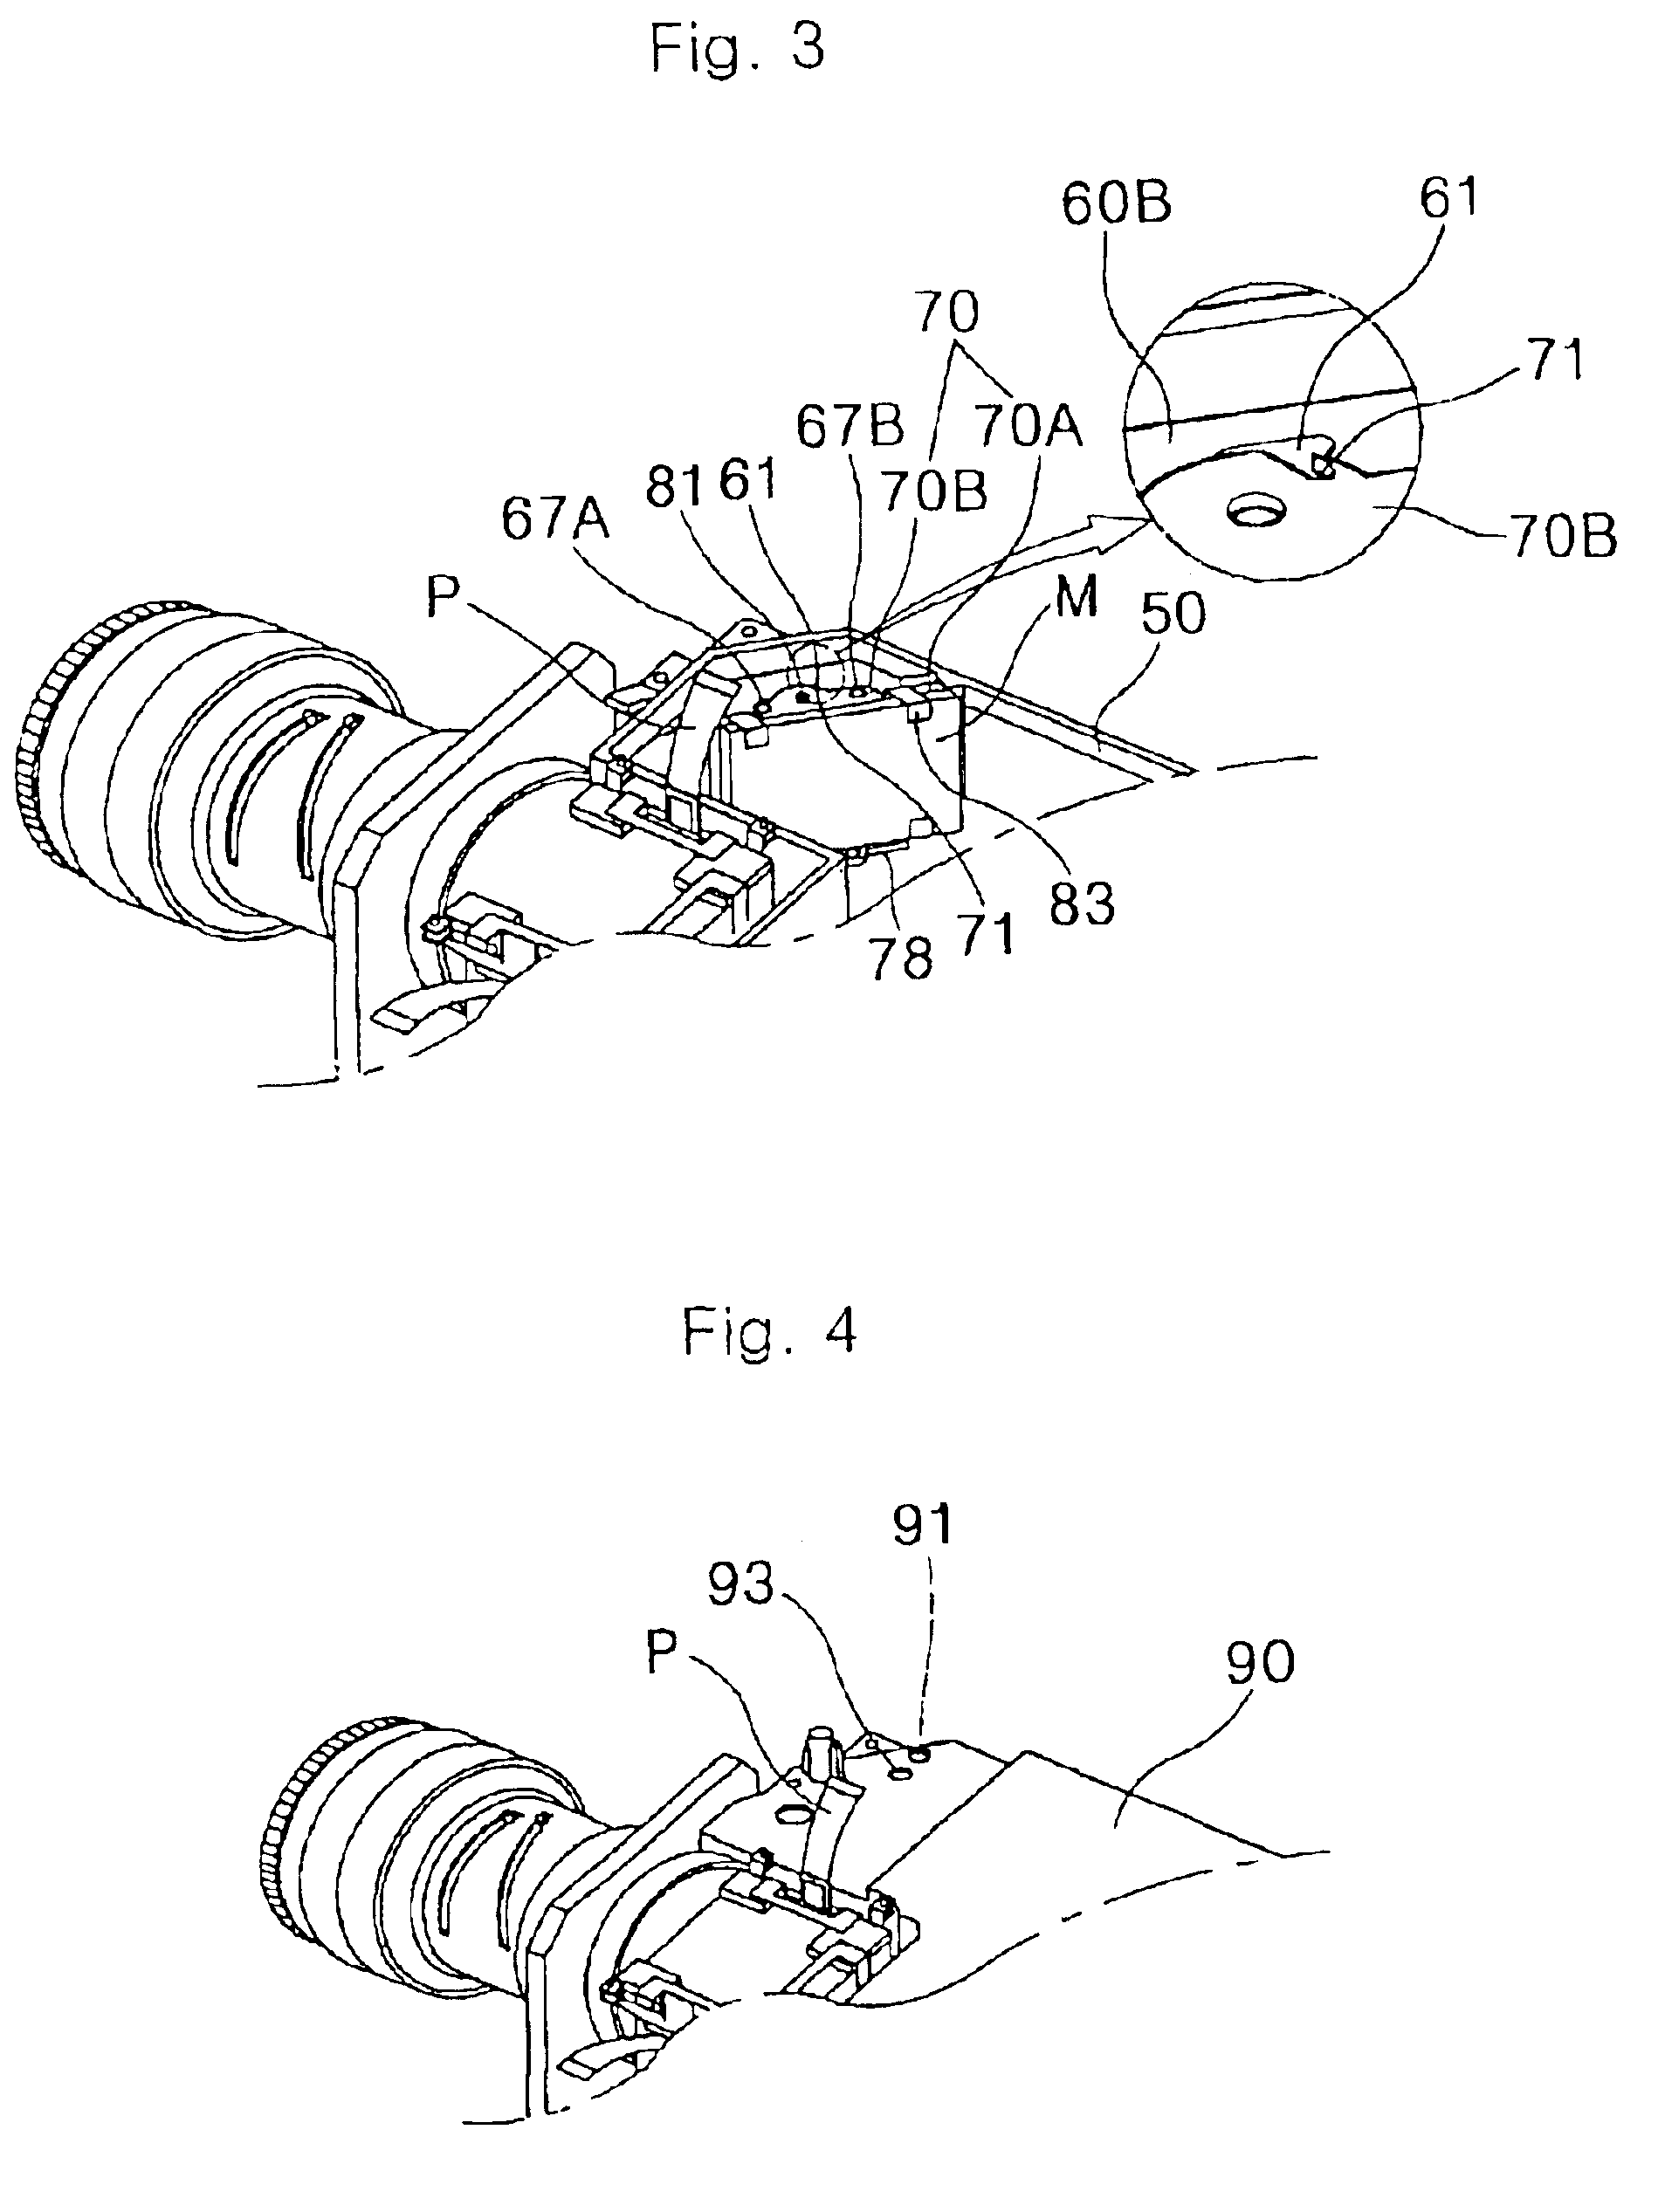 Apparatus for adjusting position of mirror in projector